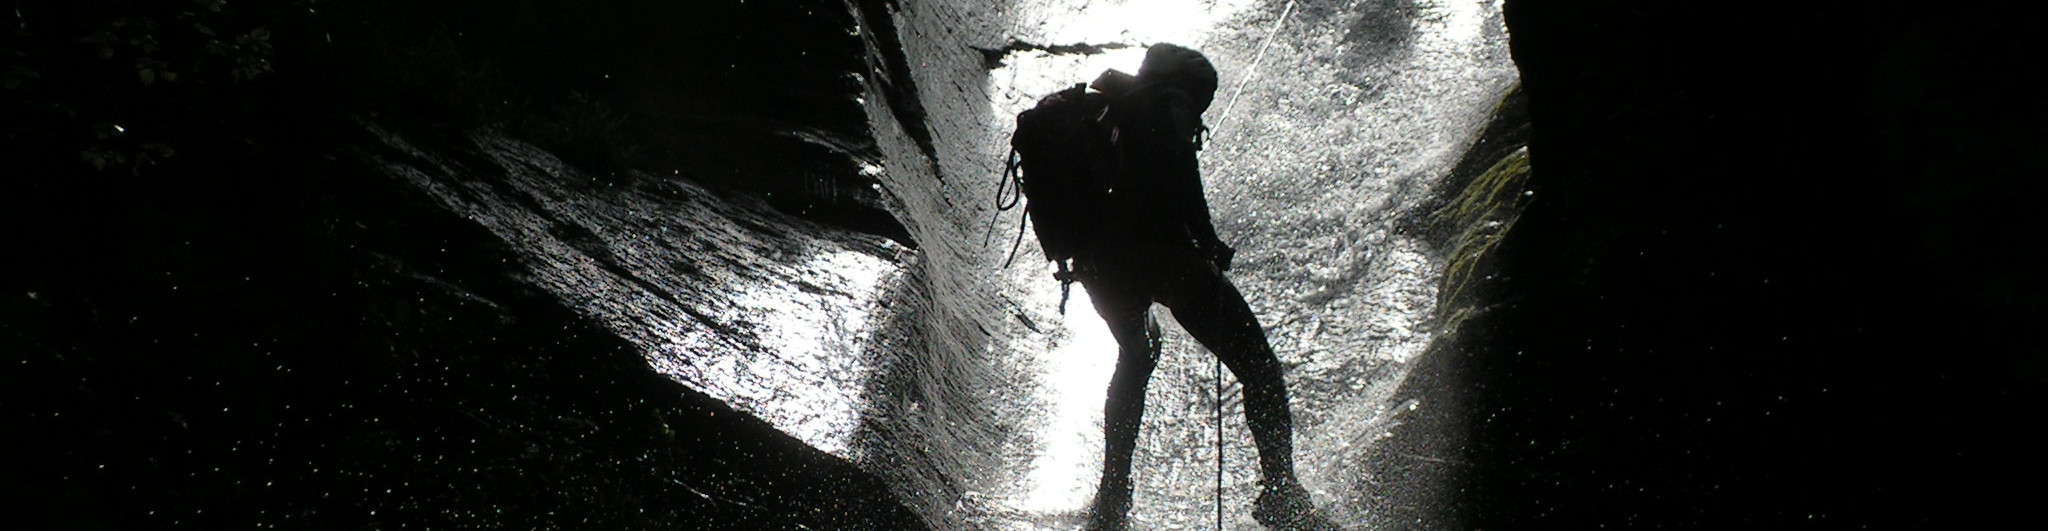 , Sicurezza e Materiale, Canyoning Valle d&#039;Aosta